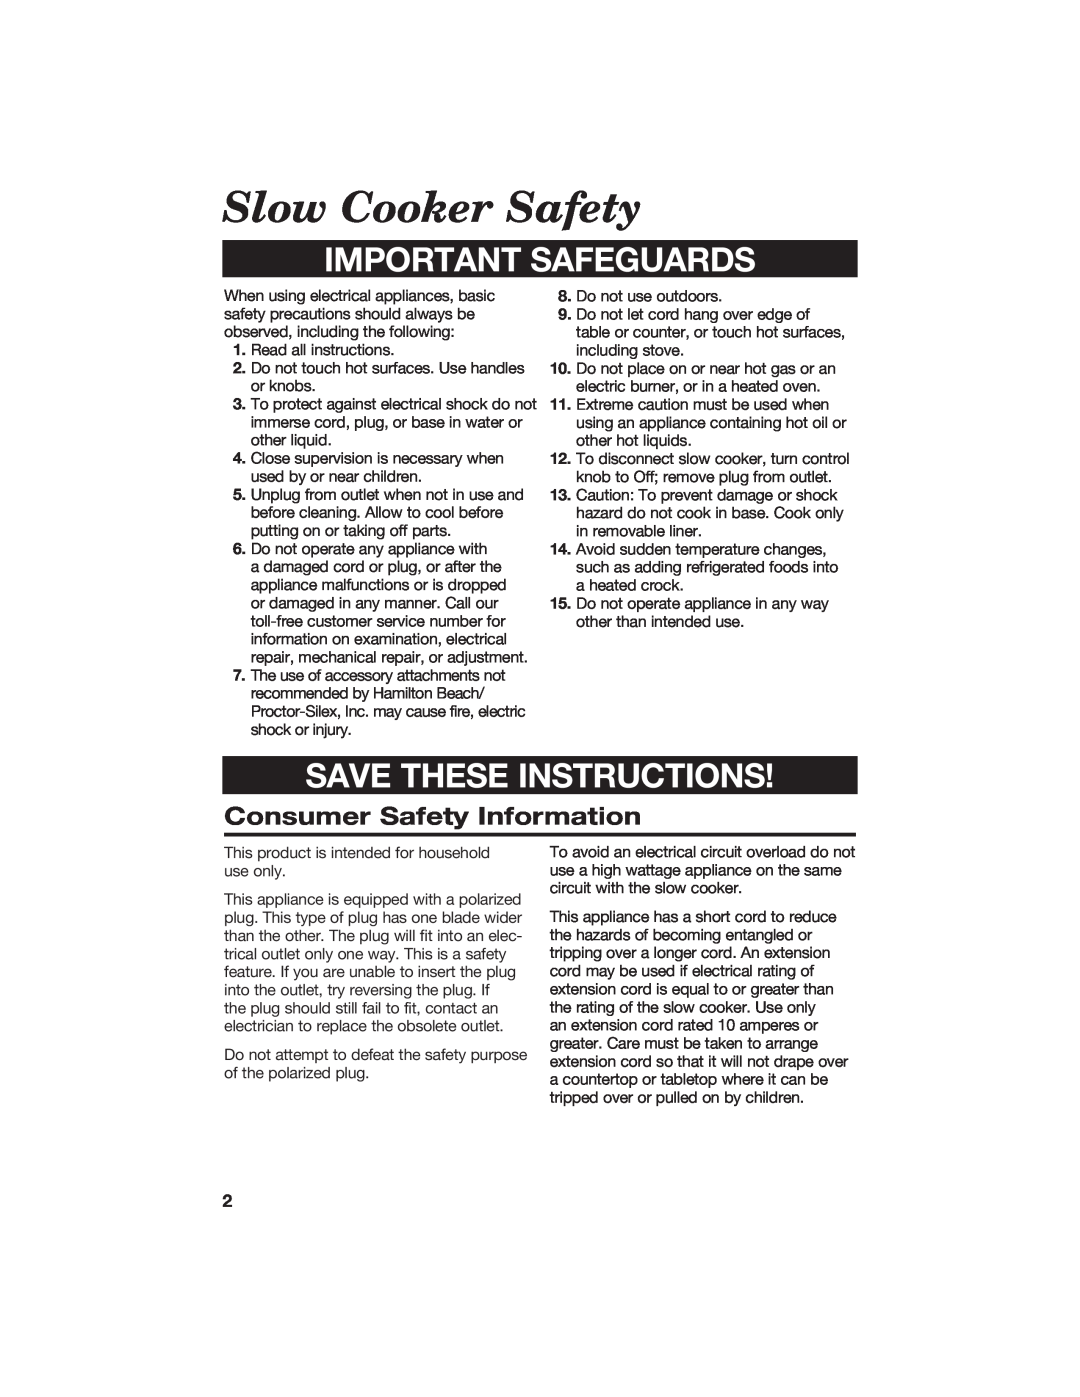 Hamilton Beach 840056100 Slow Cooker Safety, Consumer Safety Information, Important Safeguards, Save These Instructions 